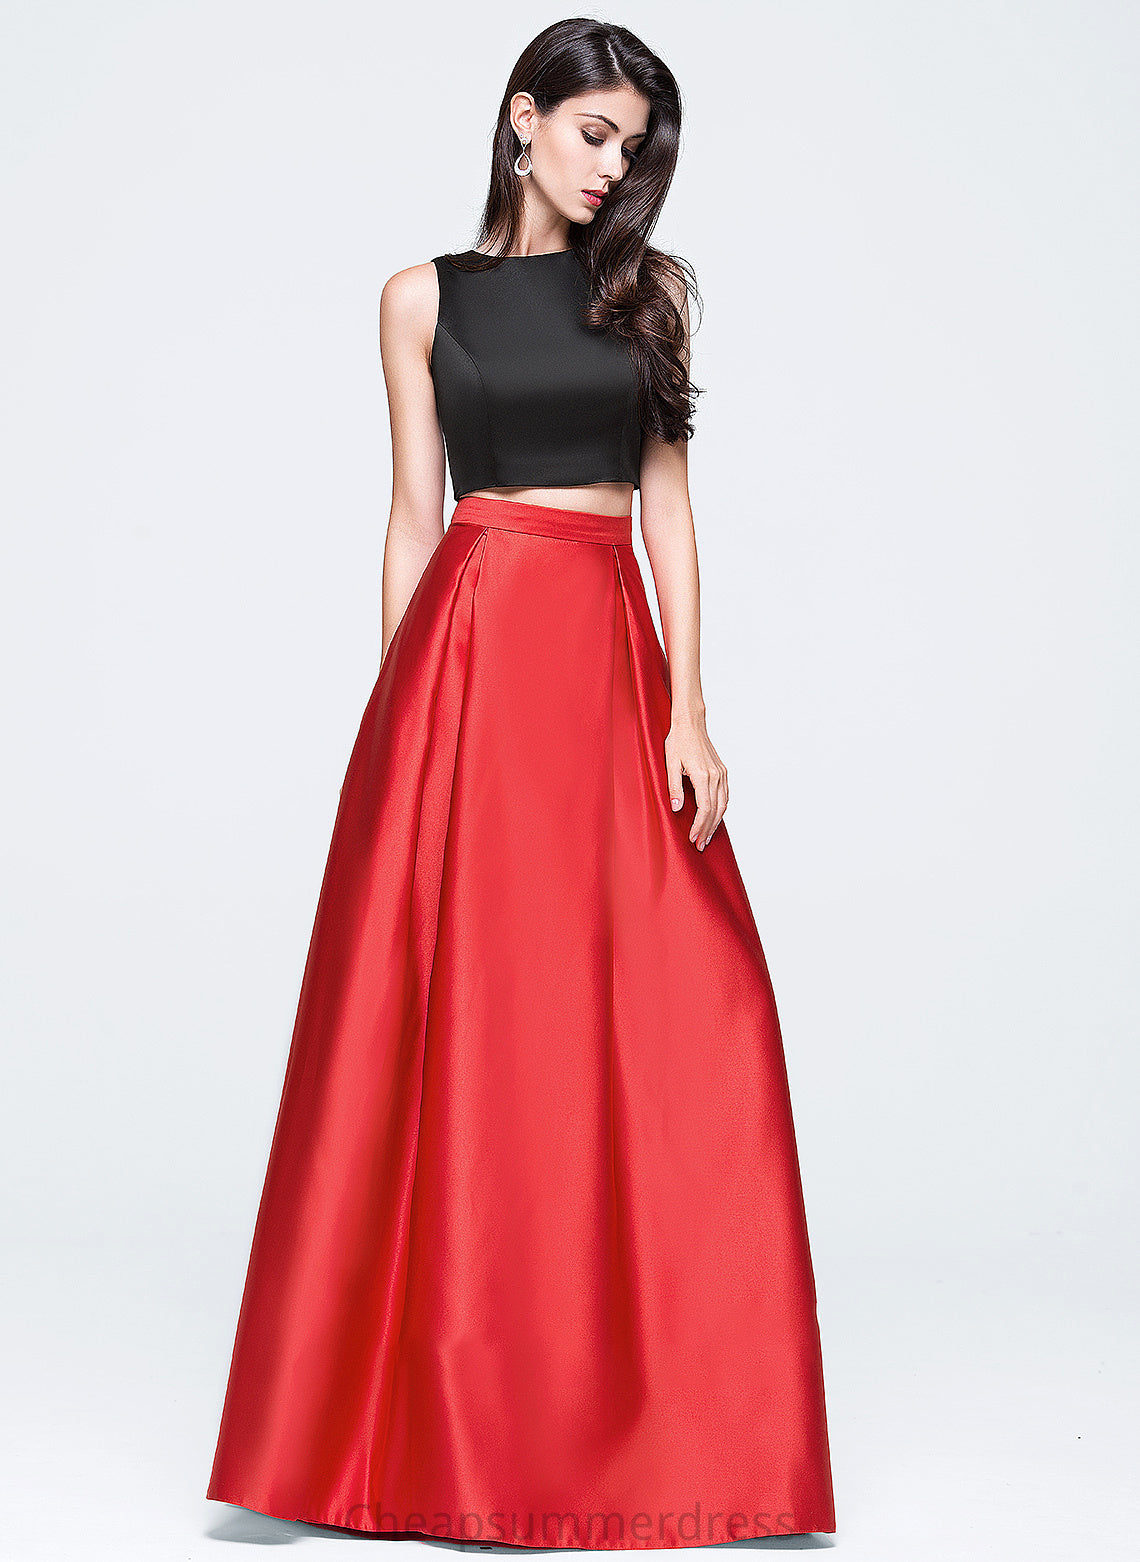 Prom Dresses Neck With Scoop Pockets Ball-Gown/Princess Floor-Length Satin Marley